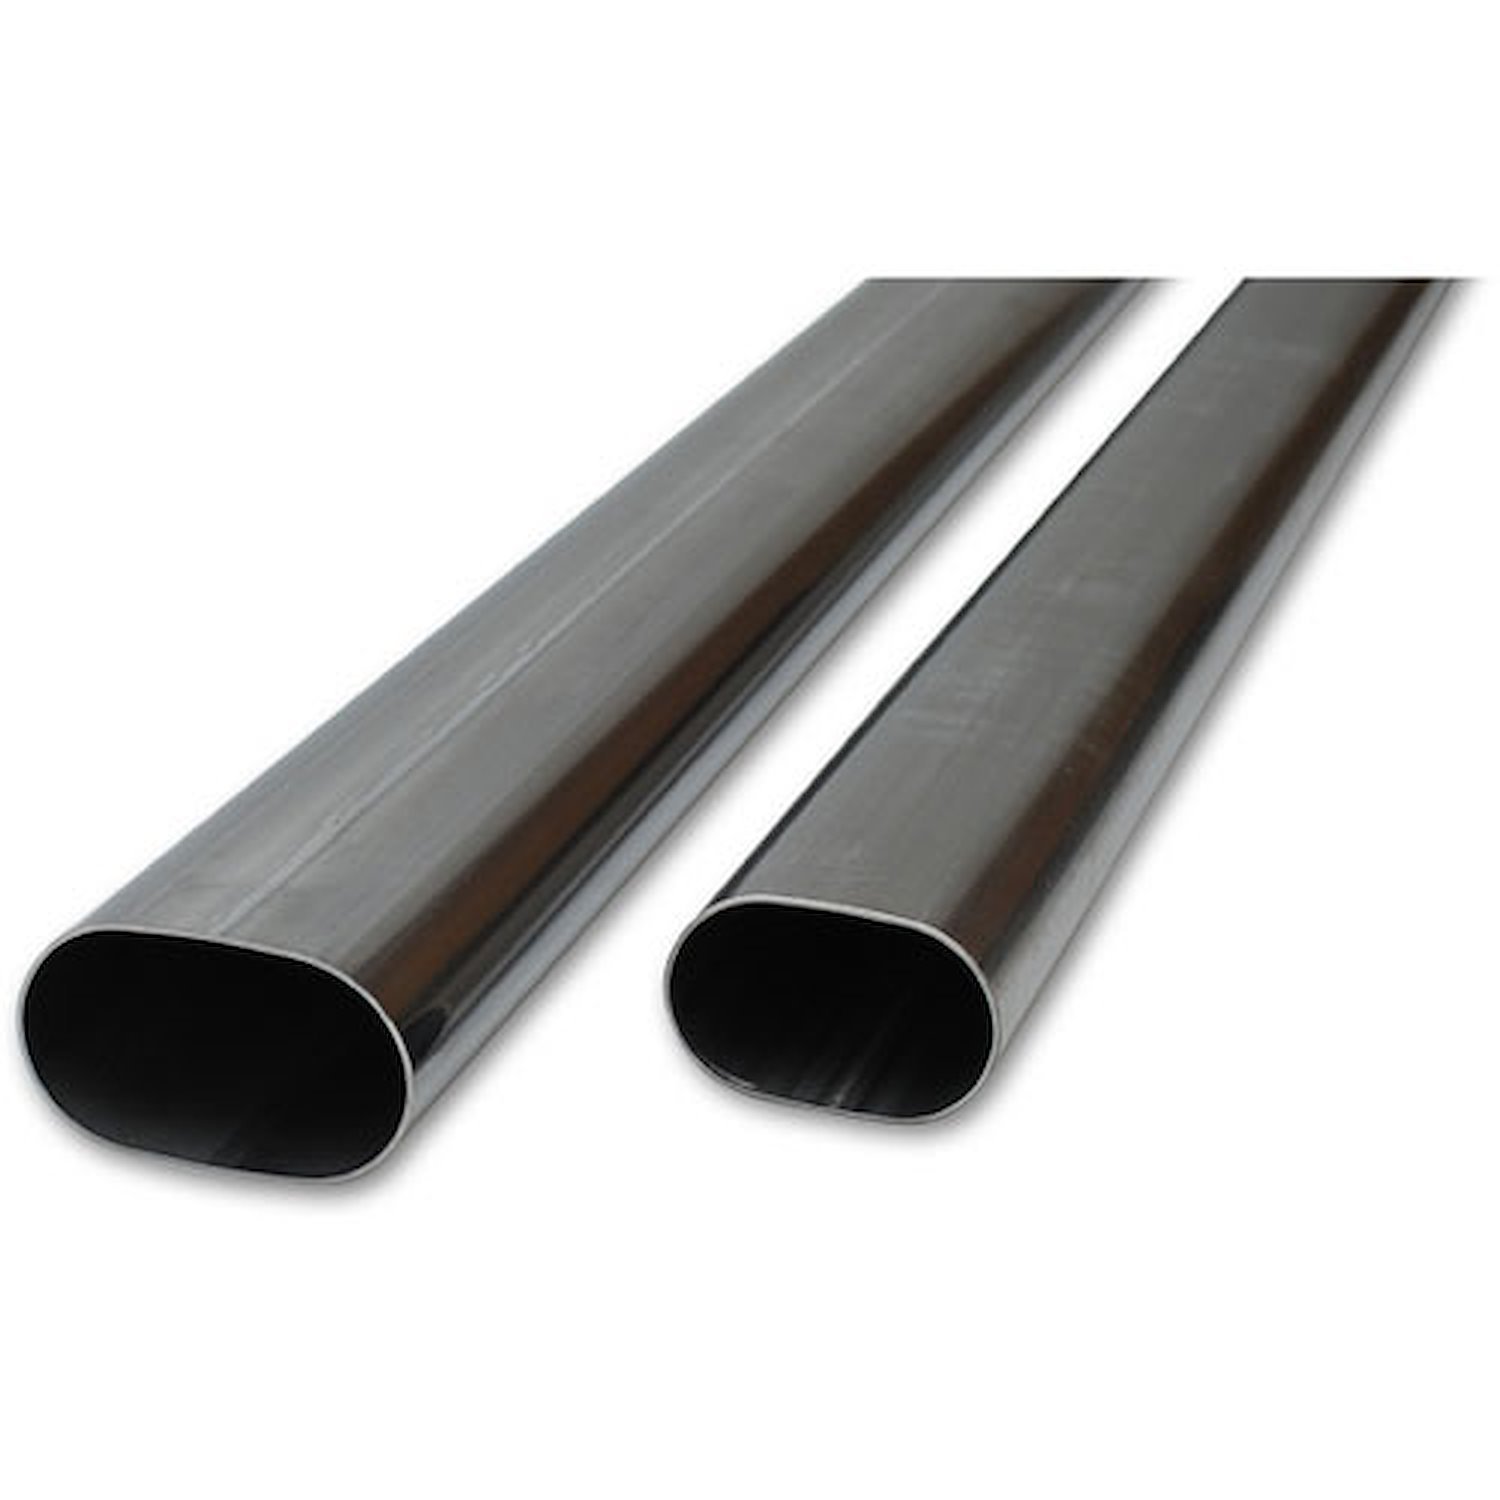 Stainless Steel Straight Oval Tubing 4" Nominal Oval